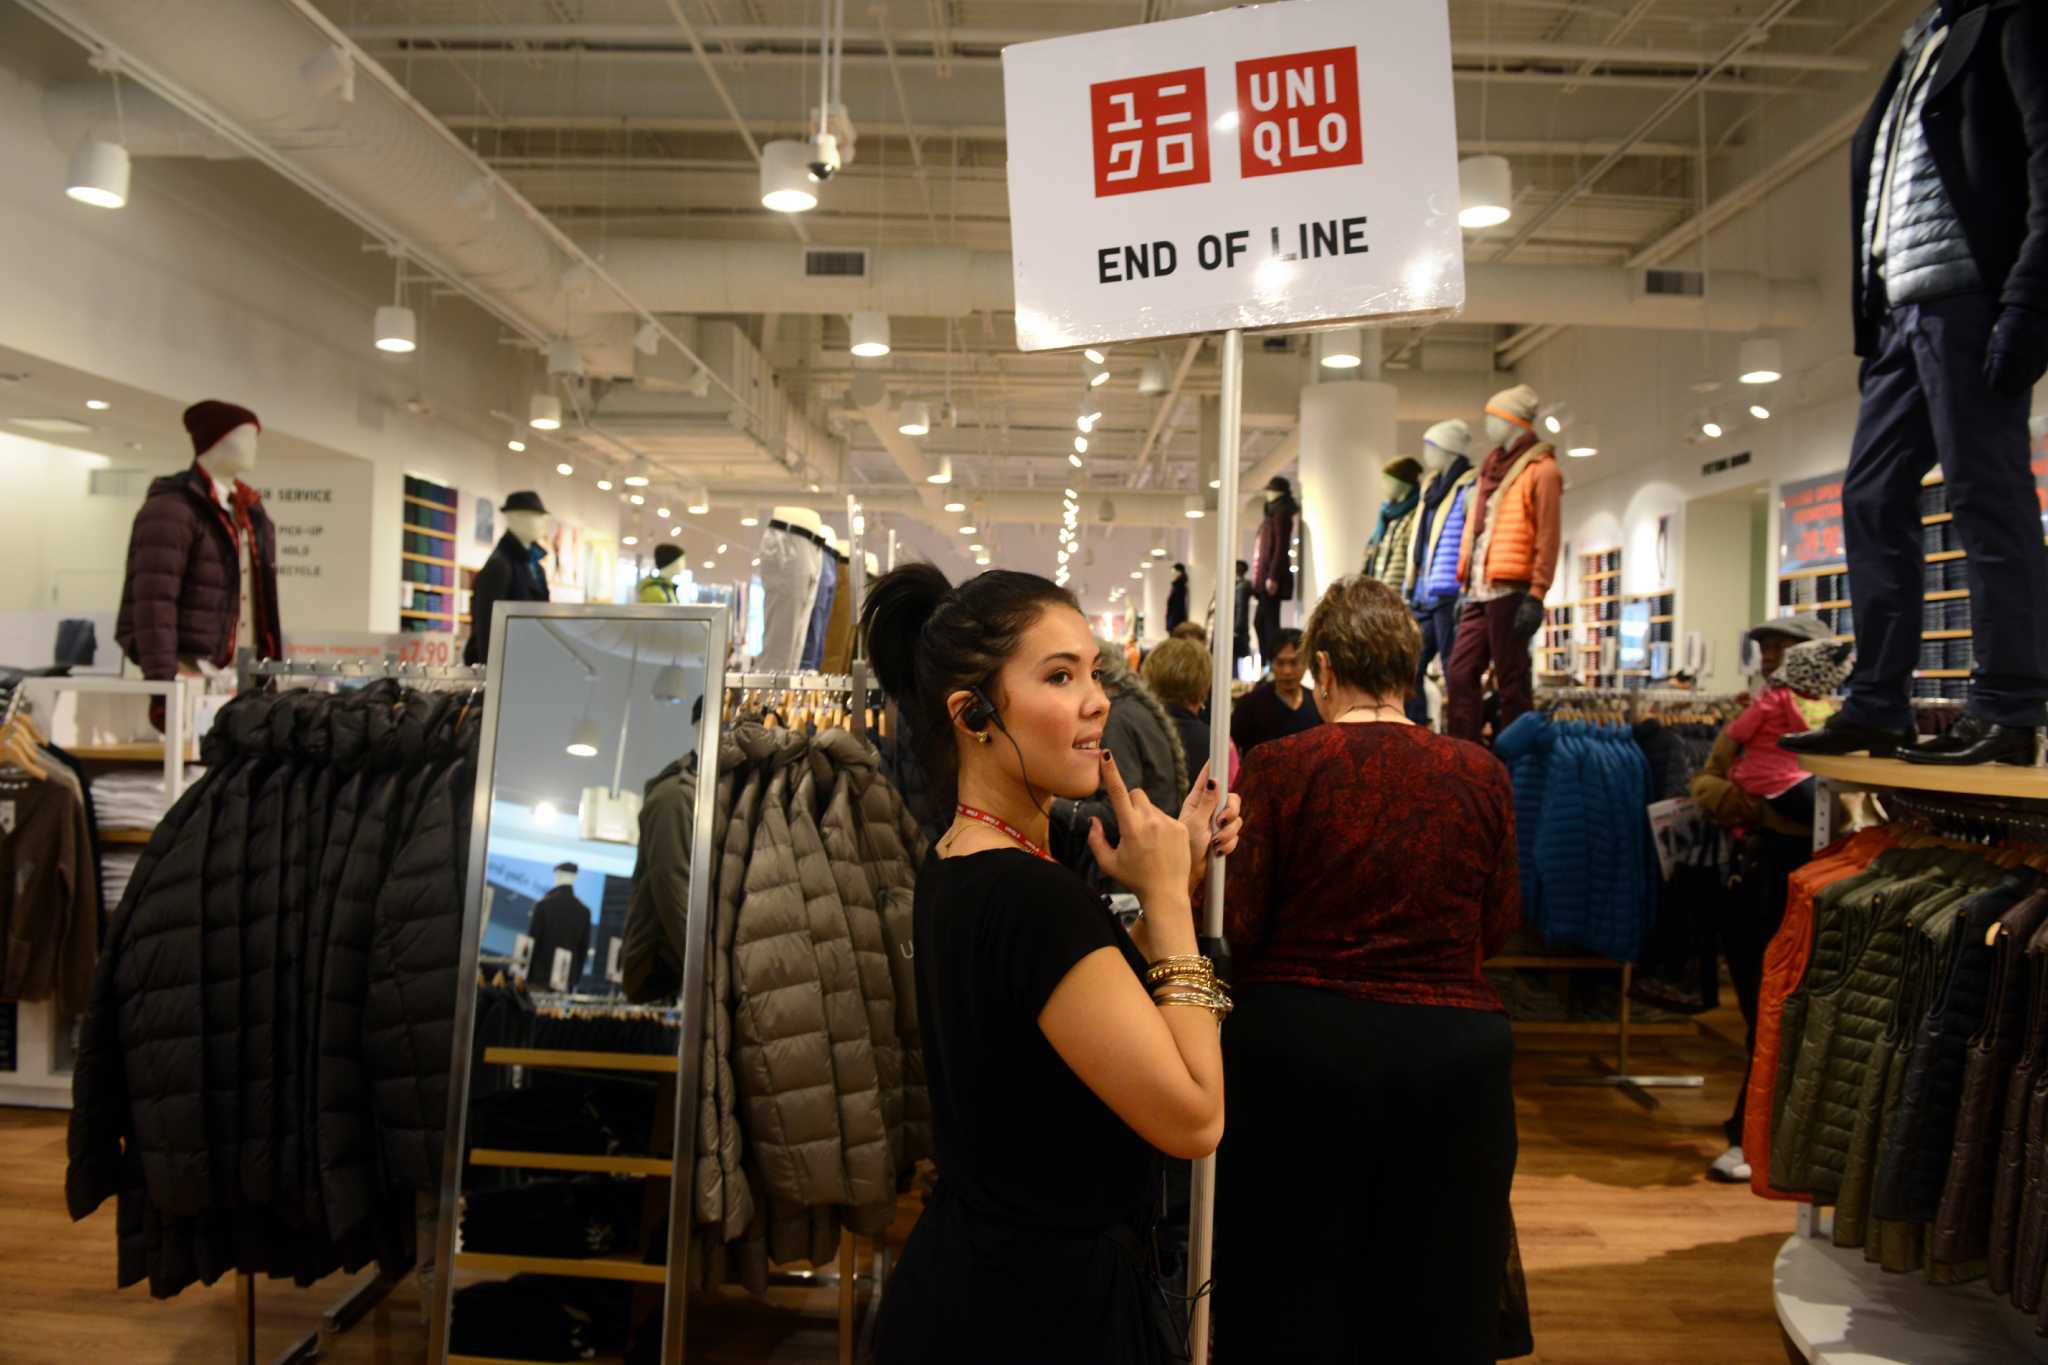 Stamford makes room for Uniqlo to open in two empty mall stores